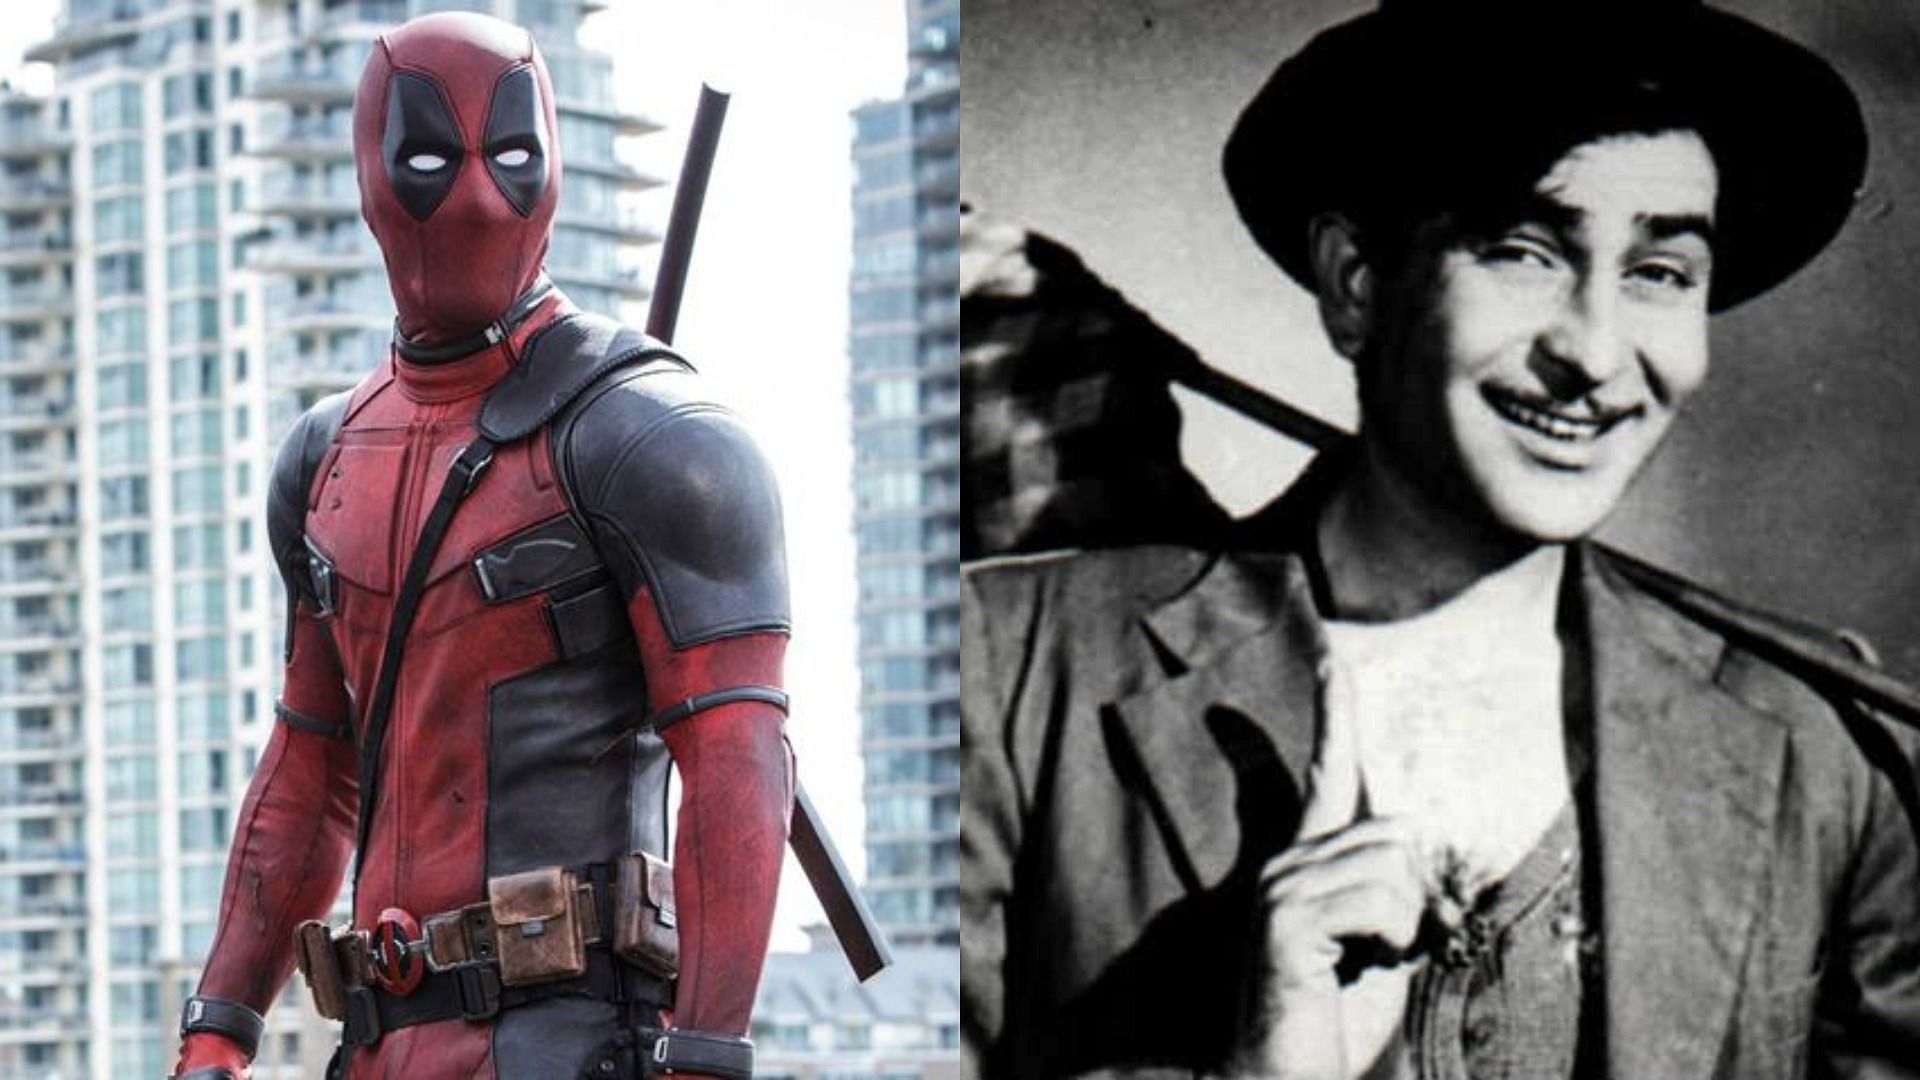 Deadpool featured a Bollywood song (Images via 20th Century Studios and an unknown source)